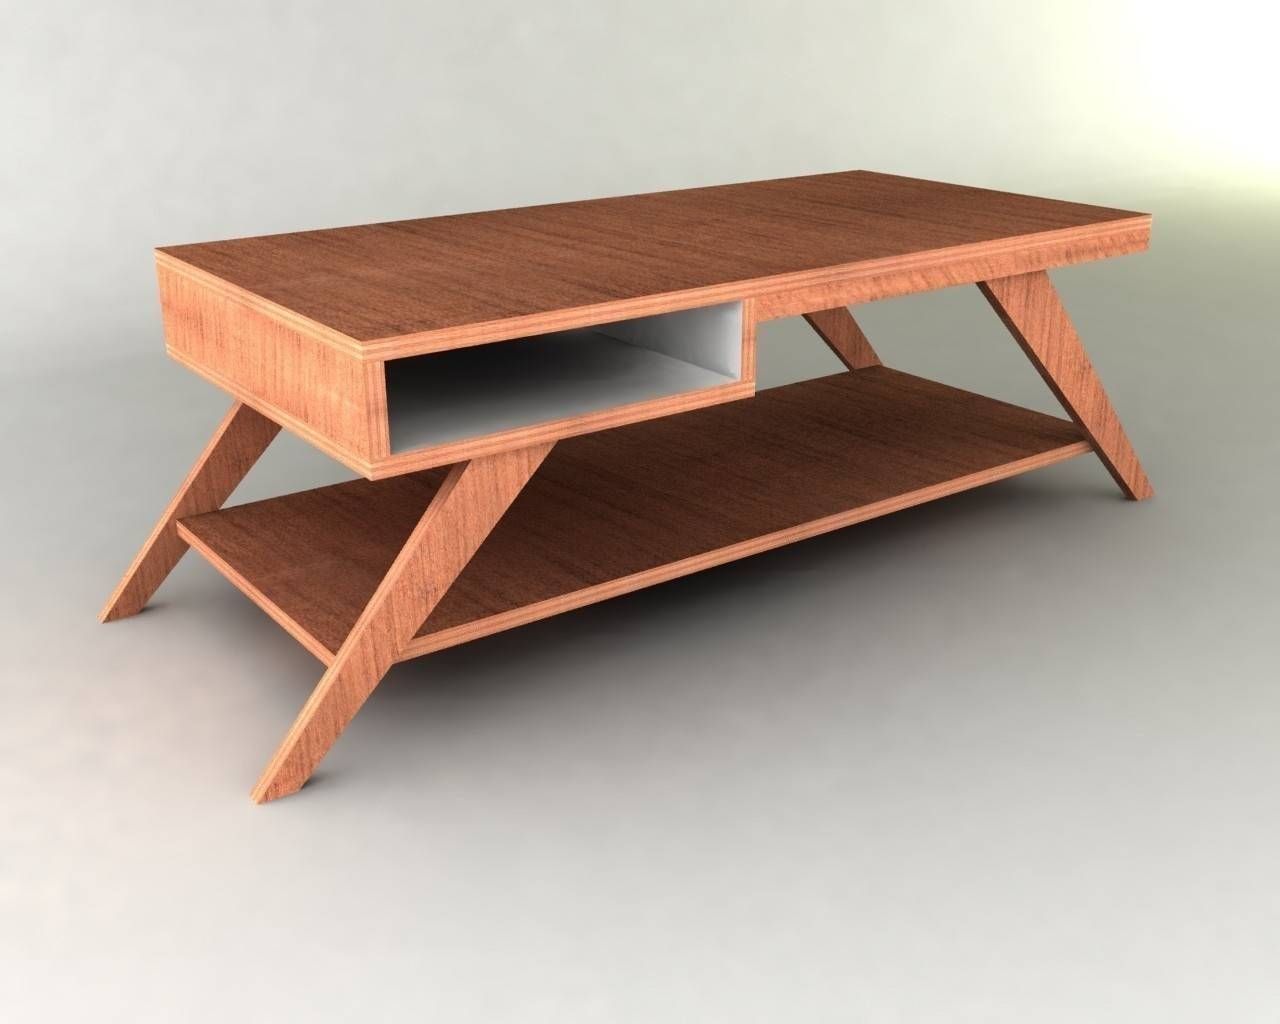 Unusual Wooden Coffee Tables Magnificent On Table Ideas In Company Intended For Unusual Wooden Coffee Tables (View 8 of 15)